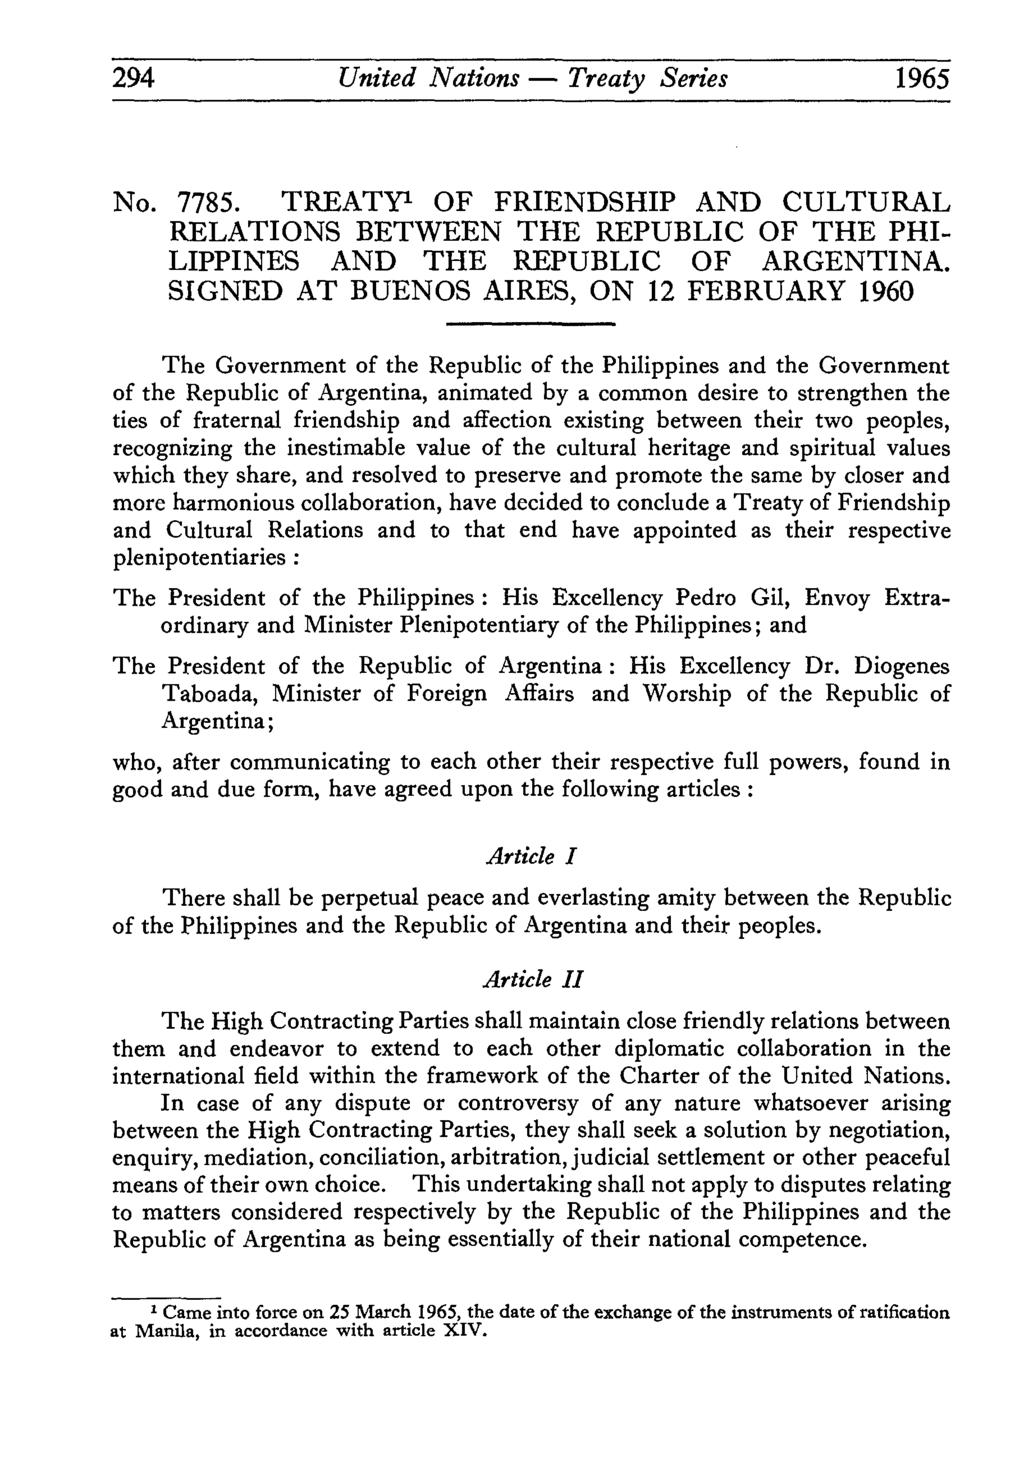 294 United Nations Treaty Series 1965. TREATY1 OF FRIENDSHIP AND CULTURAL RELATIONS BETWEEN THE REPUBLIC OF THE PHI LIPPINES AND THE REPUBLIC OF ARGENTINA.